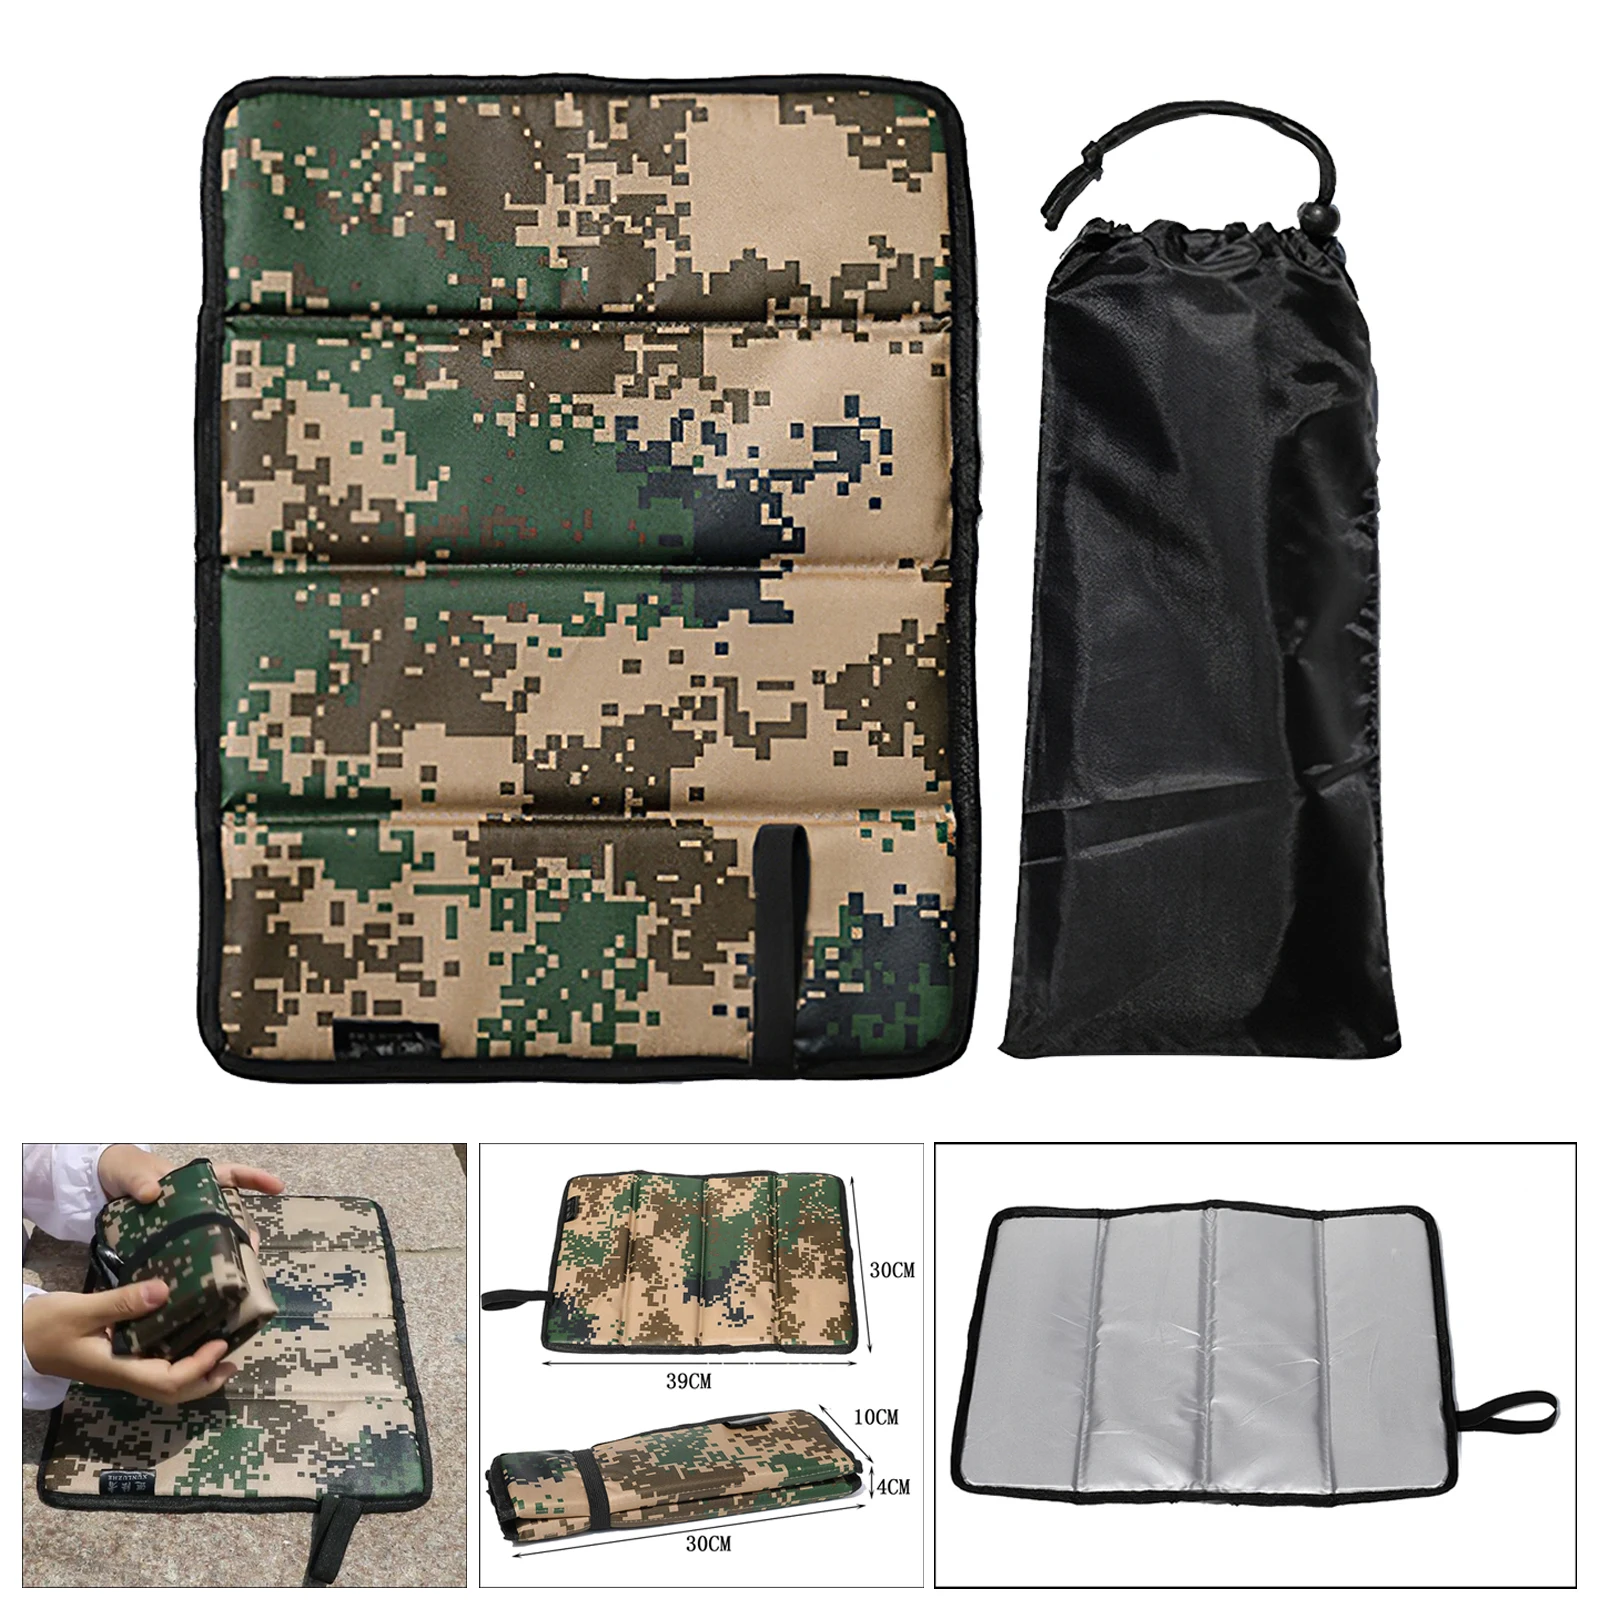 Foldable Seat Pad Camping Foam Seat Cushion Sitting Mat Portable Beach Pad for Outdoor Camping Hiking Travel BBQ Picnic